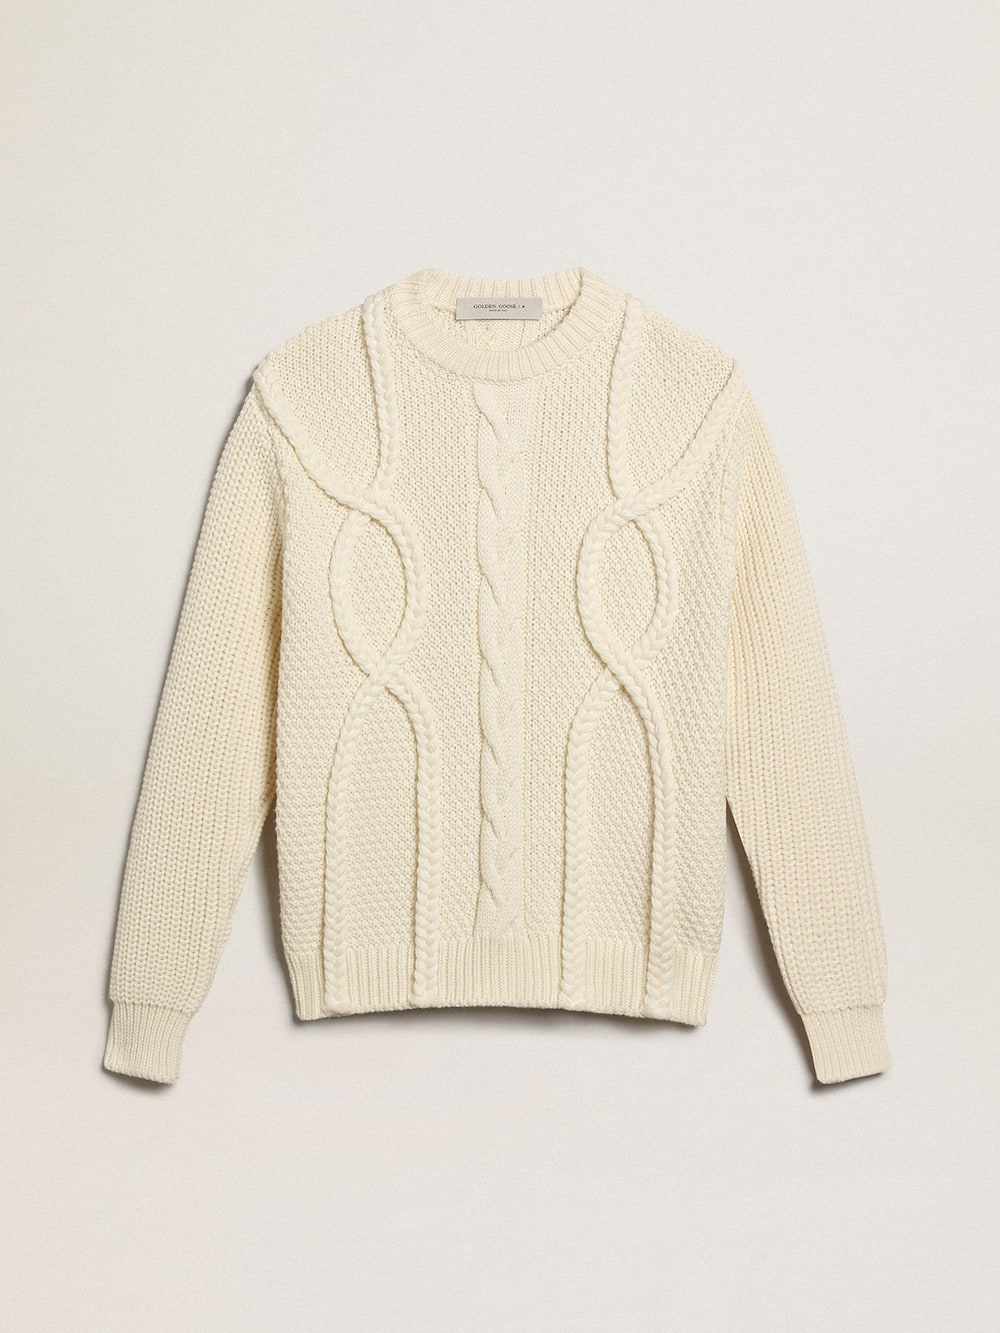 Golden Goose - Men's round-neck sweater in wool with braided motif in 